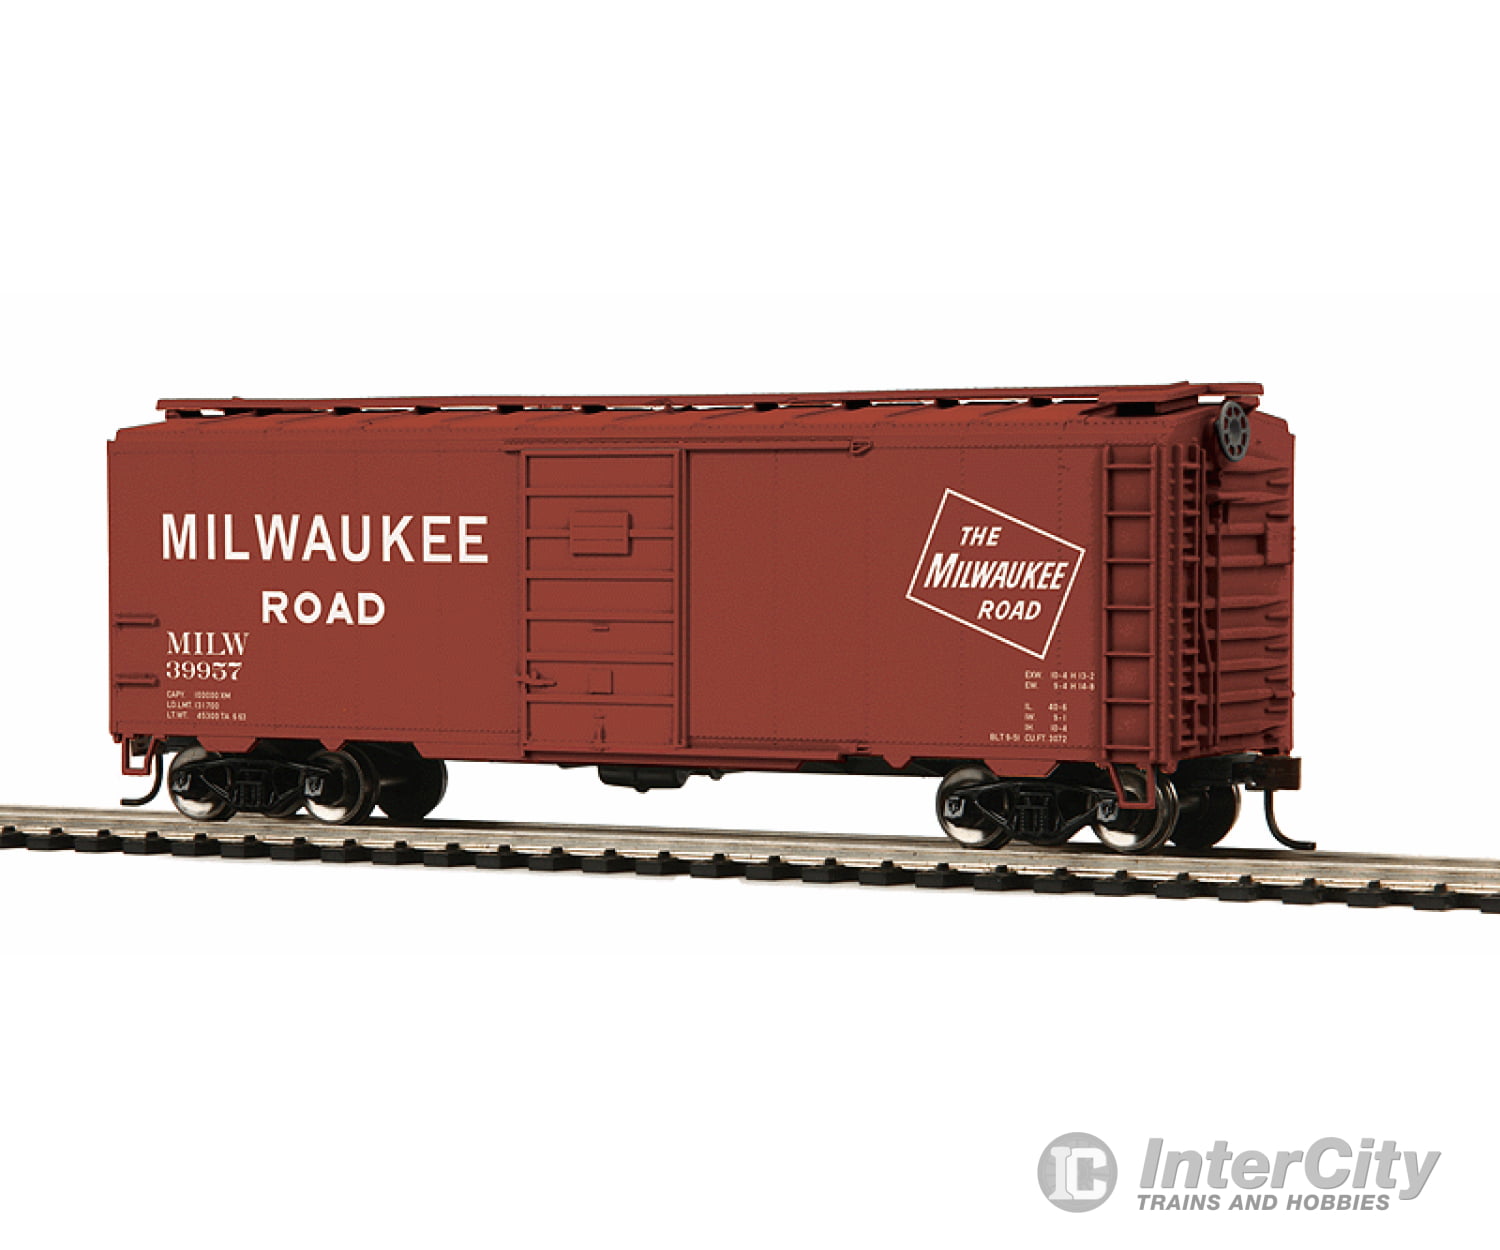 Mth Electric Trains Ho 8574099 Pullman-Standard Ps-1 40 Boxcar - Ready To Run -- Milwaukee Road